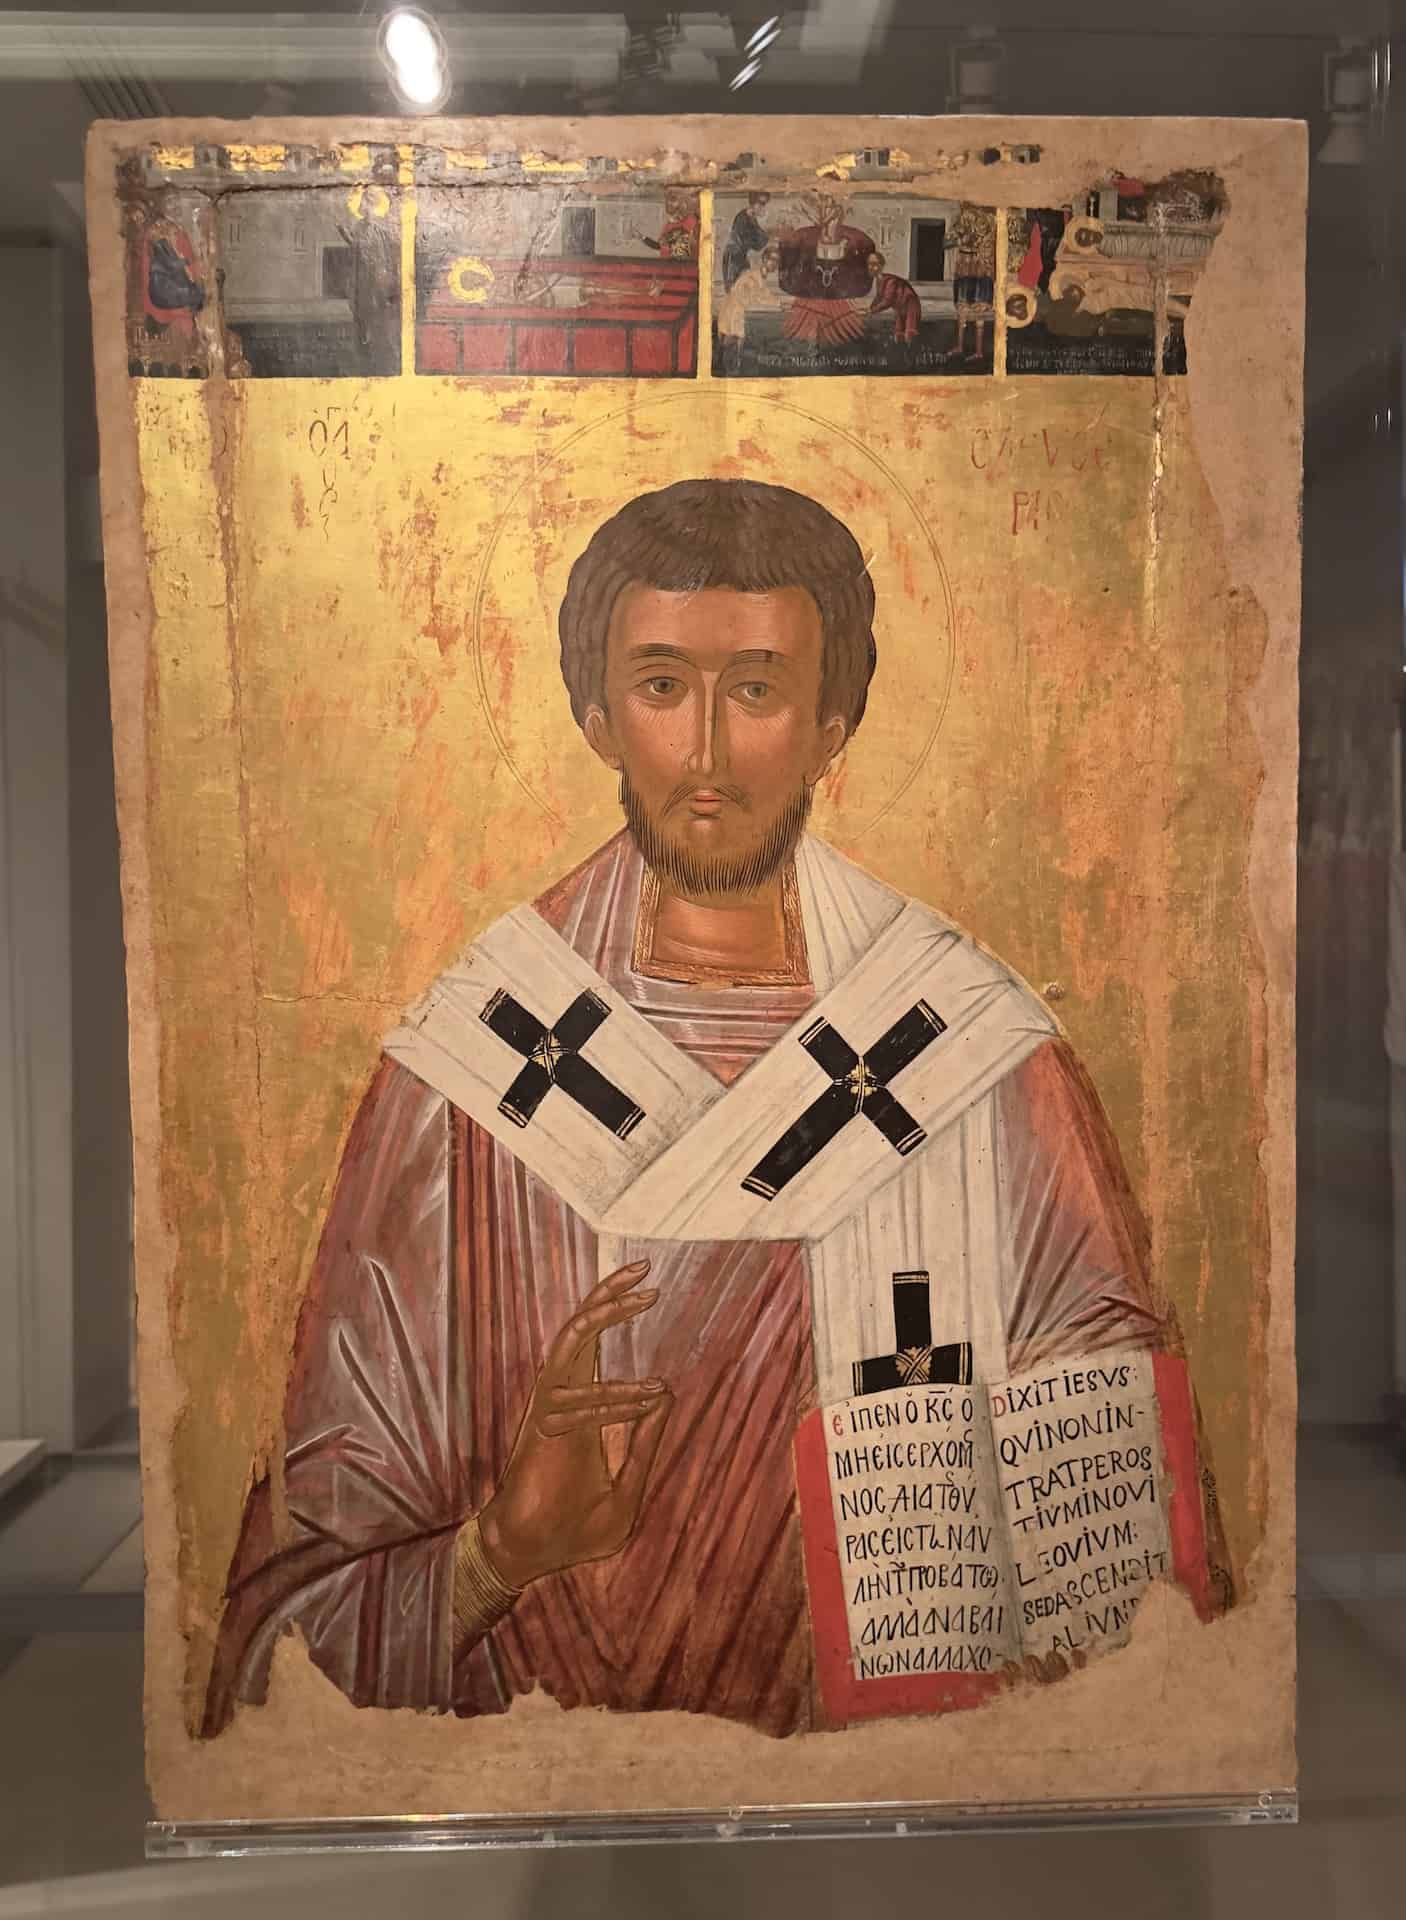 Icon with Saint Eleutherios and scenes from his life, from Messina, Sicily, 16th century at the Byzantine Museum in Athens, Greece